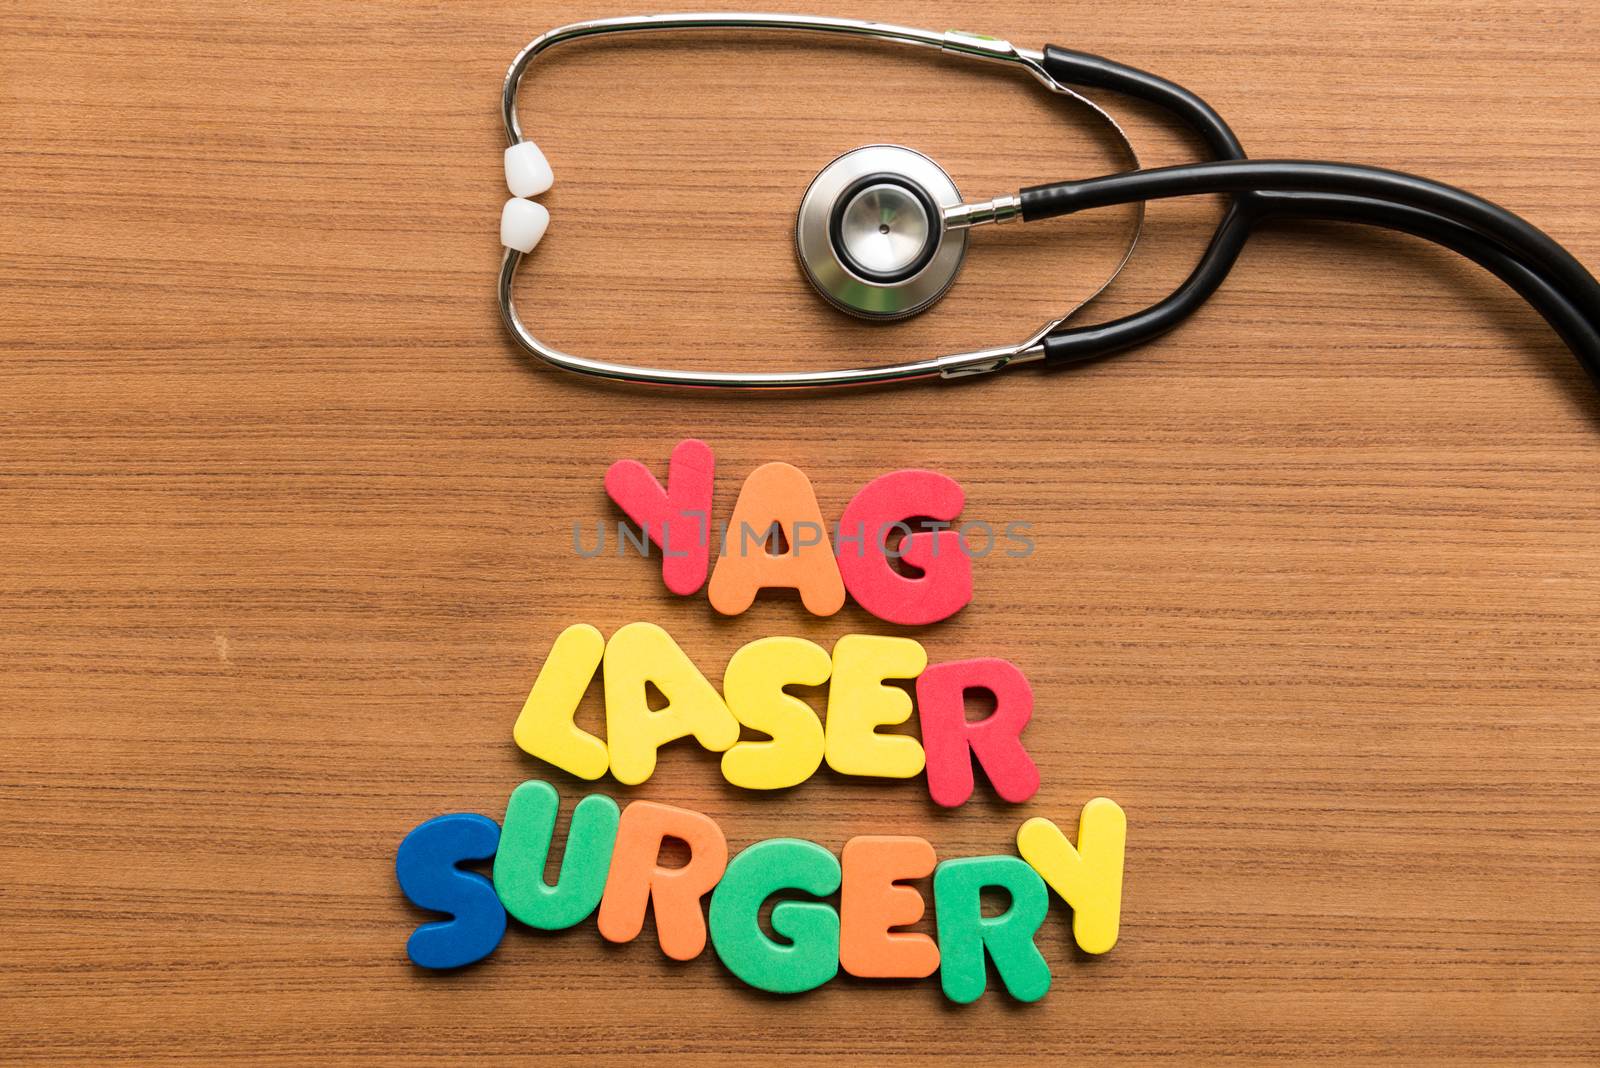 yag laser surgery colorful word with stethoscope by sohel.parvez@hotmail.com